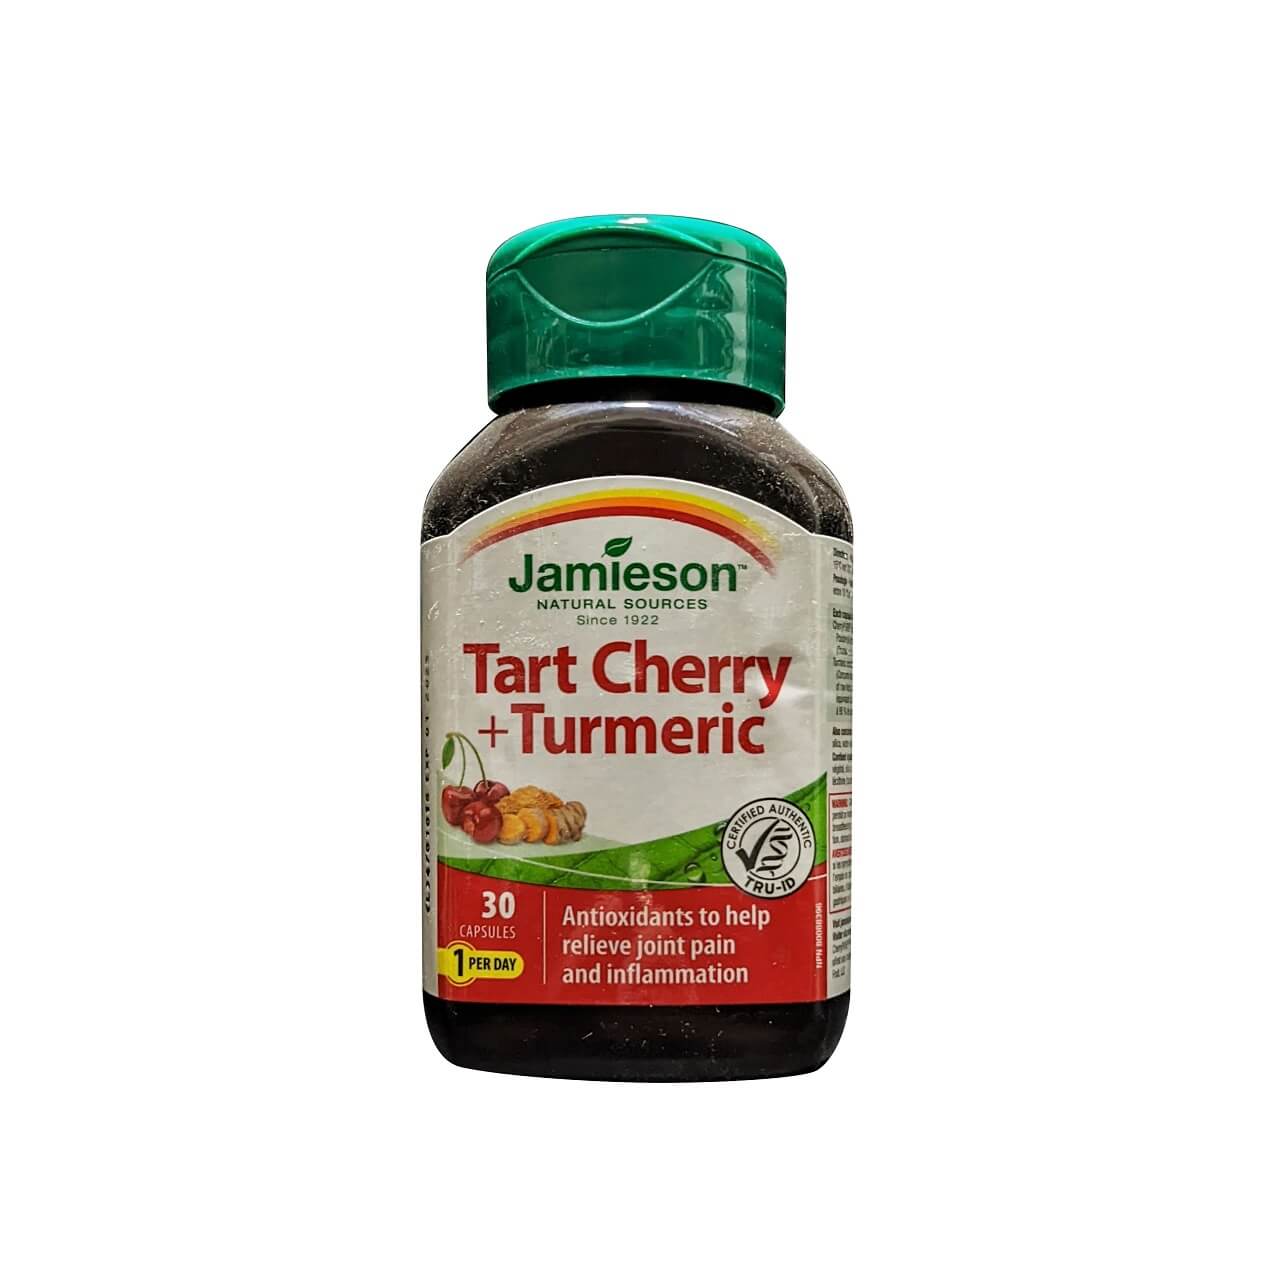 Product label for Jamieson Tart Cherry and Turmeric (30 capsules) in English